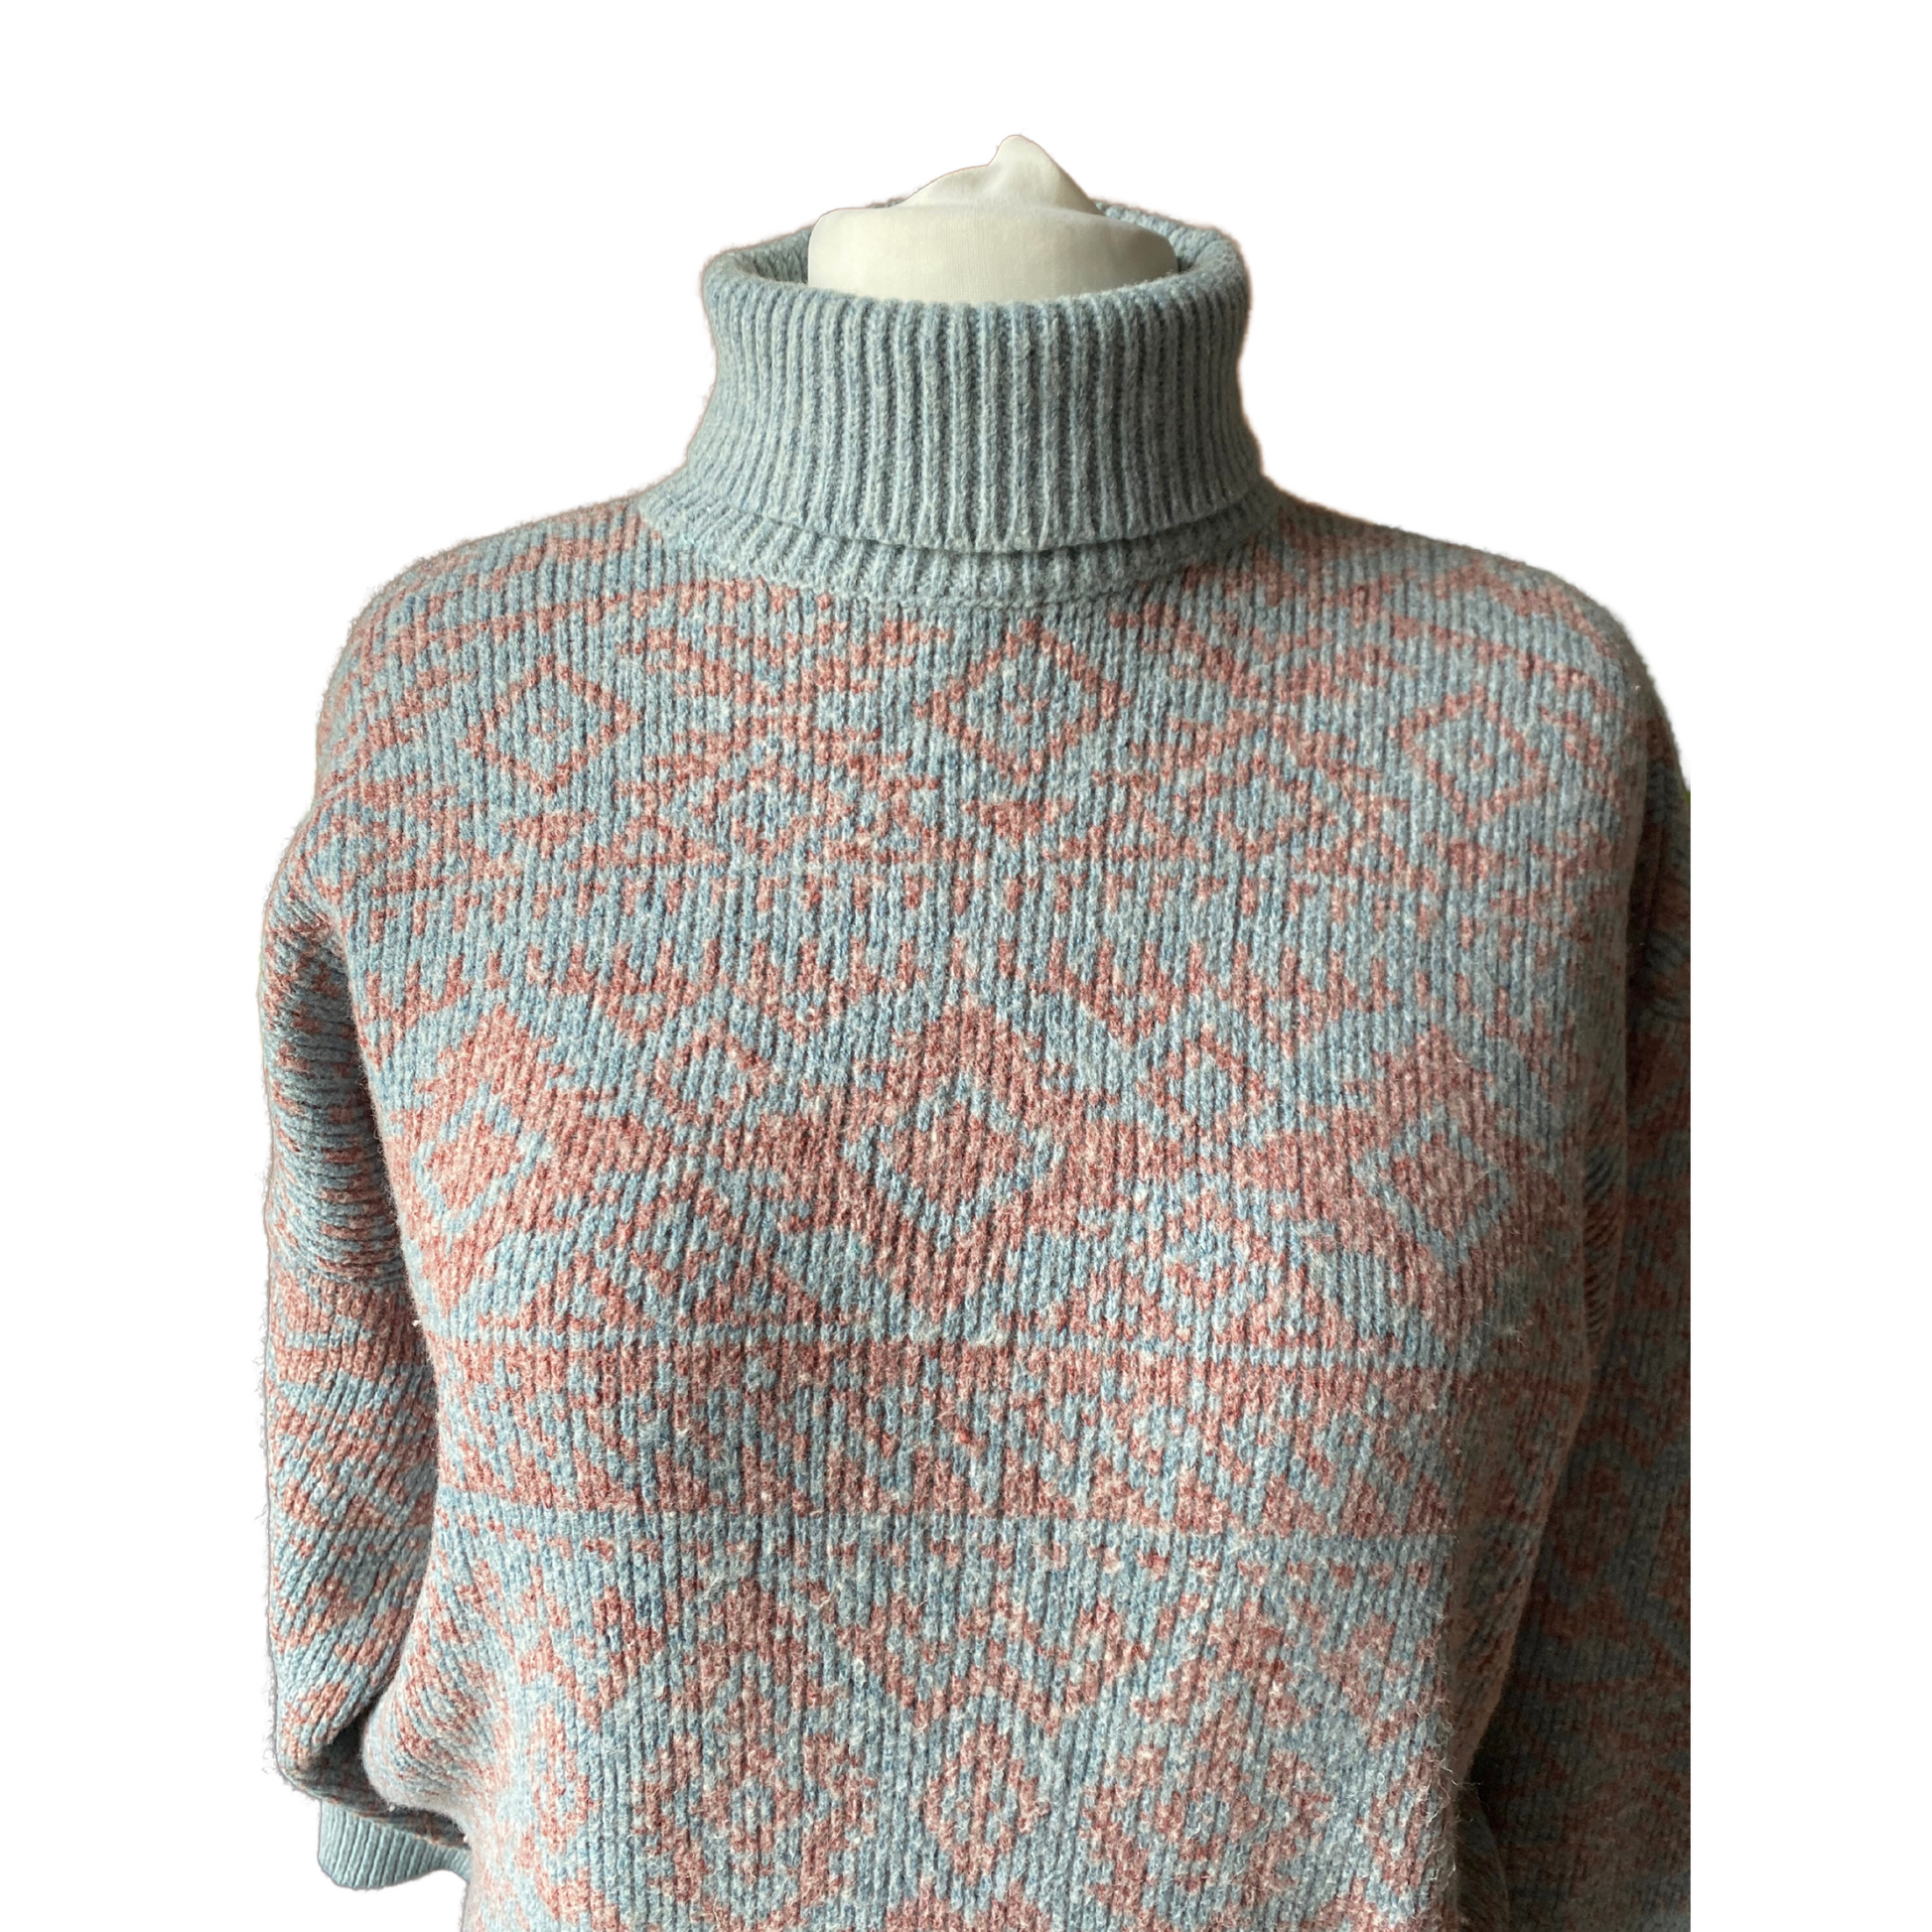 Soft and cosy wool blend jumper - perfect for relaxing in